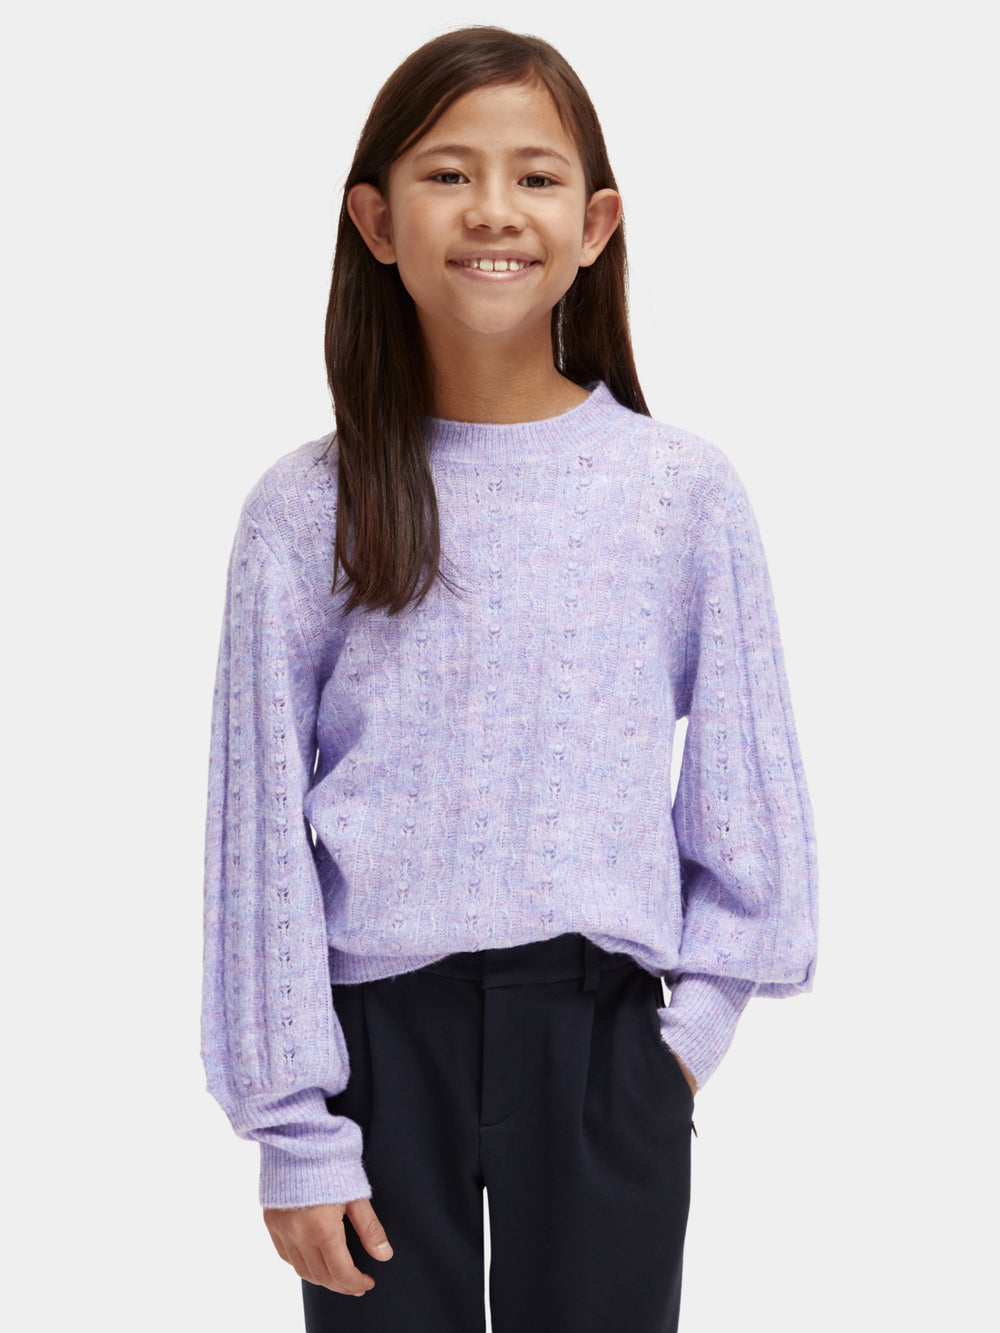 Kids - Knitted structured pullover - Scotch & Soda NZ